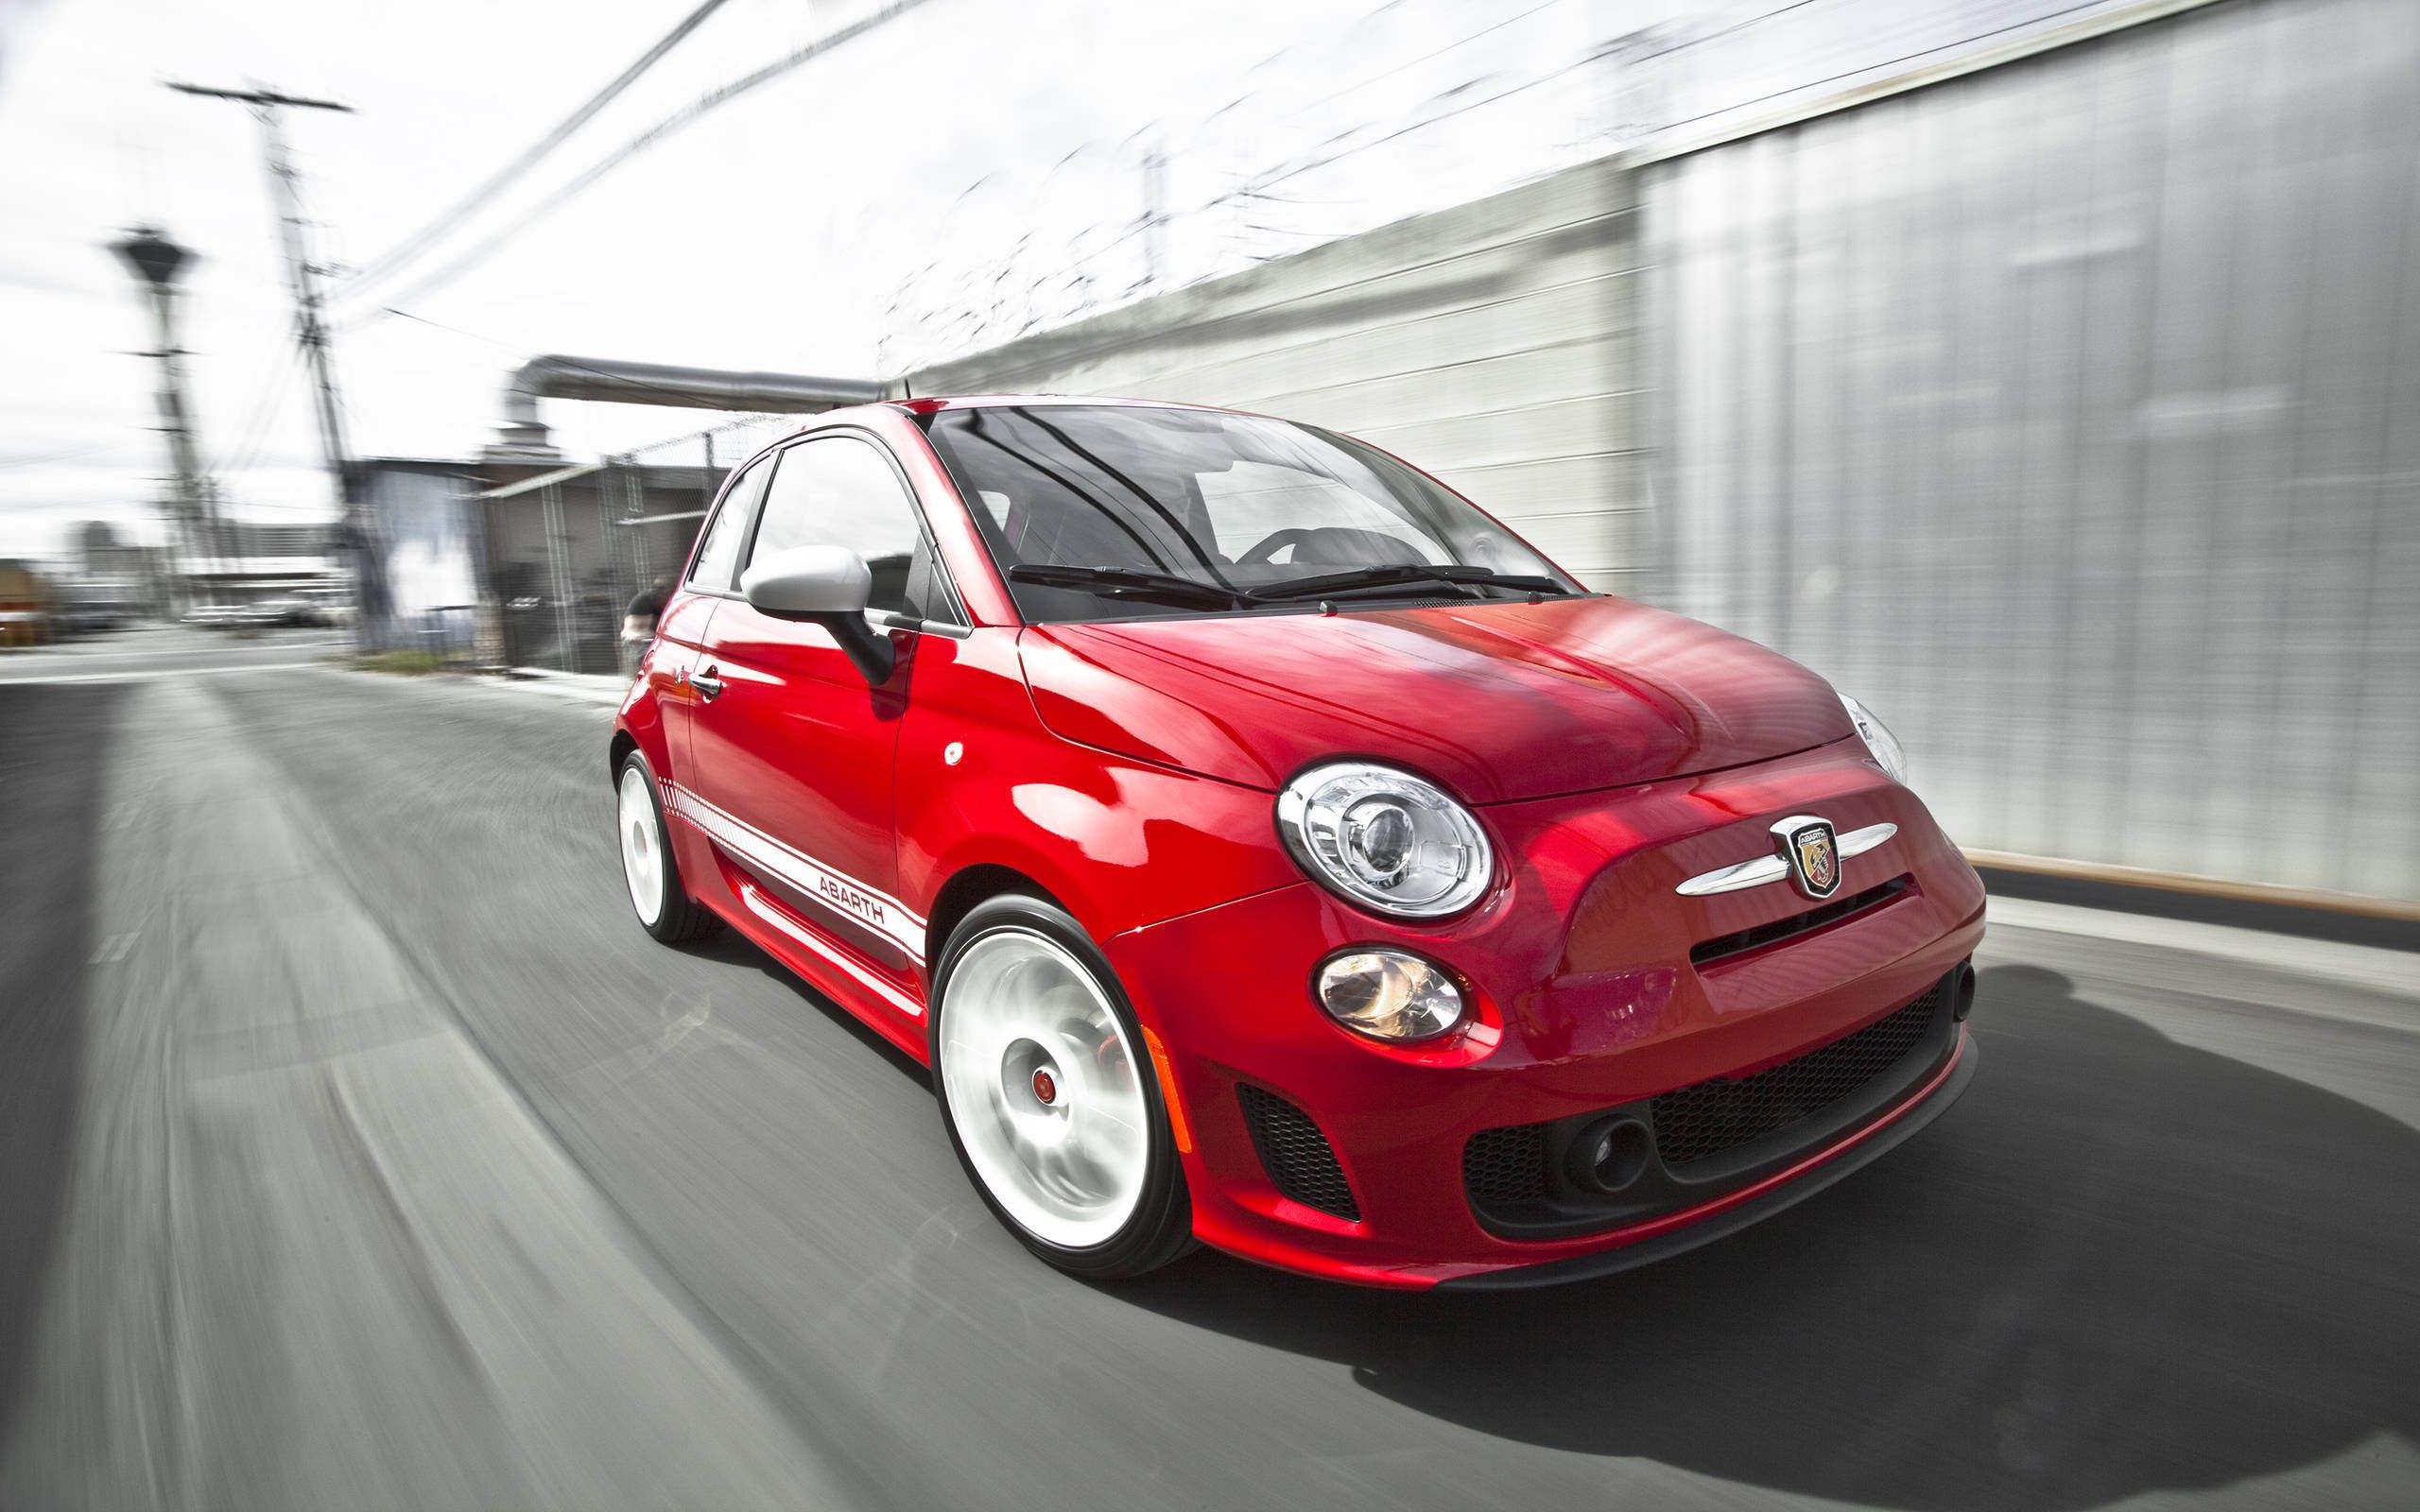 Official: The Fiat 500 is dead